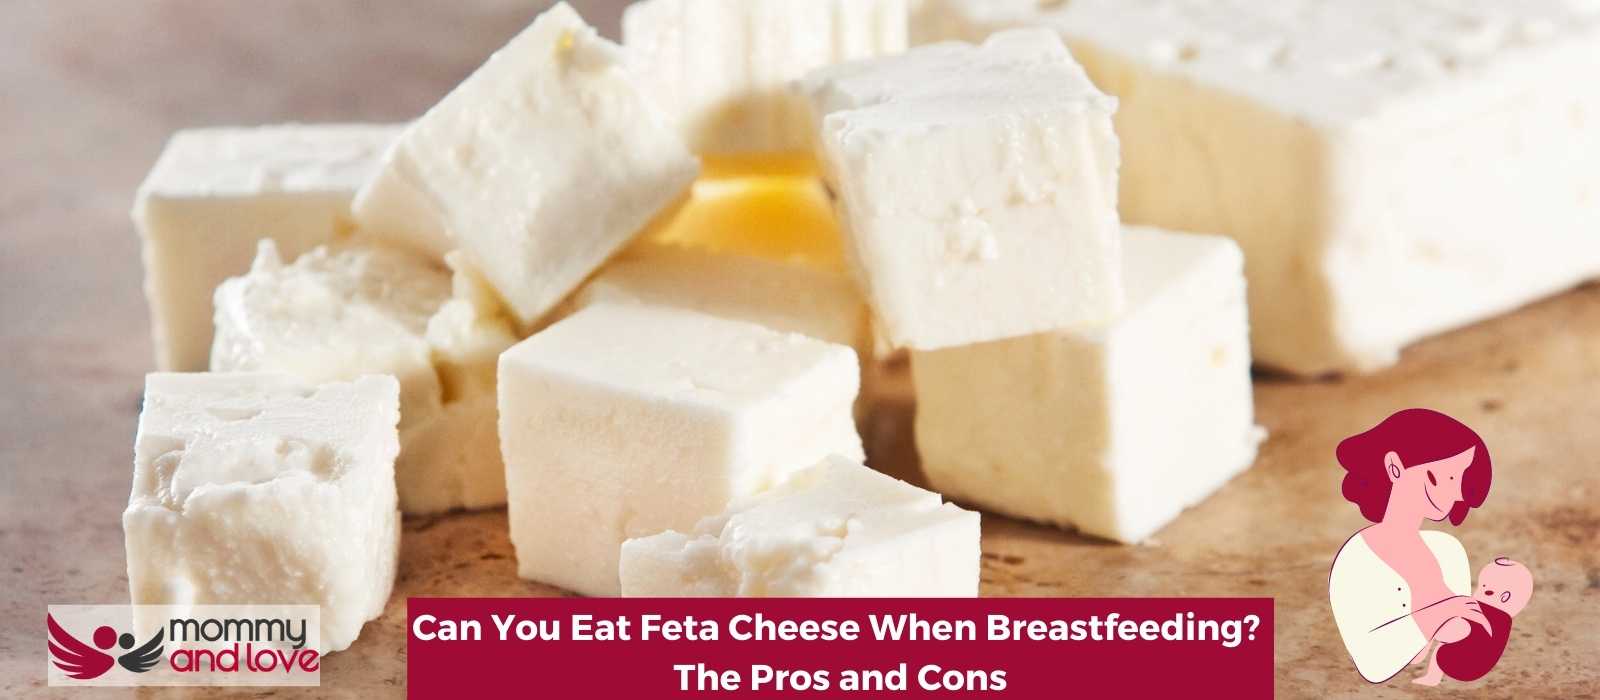 Can You Eat Feta Cheese When Breastfeeding The Pros and Cons